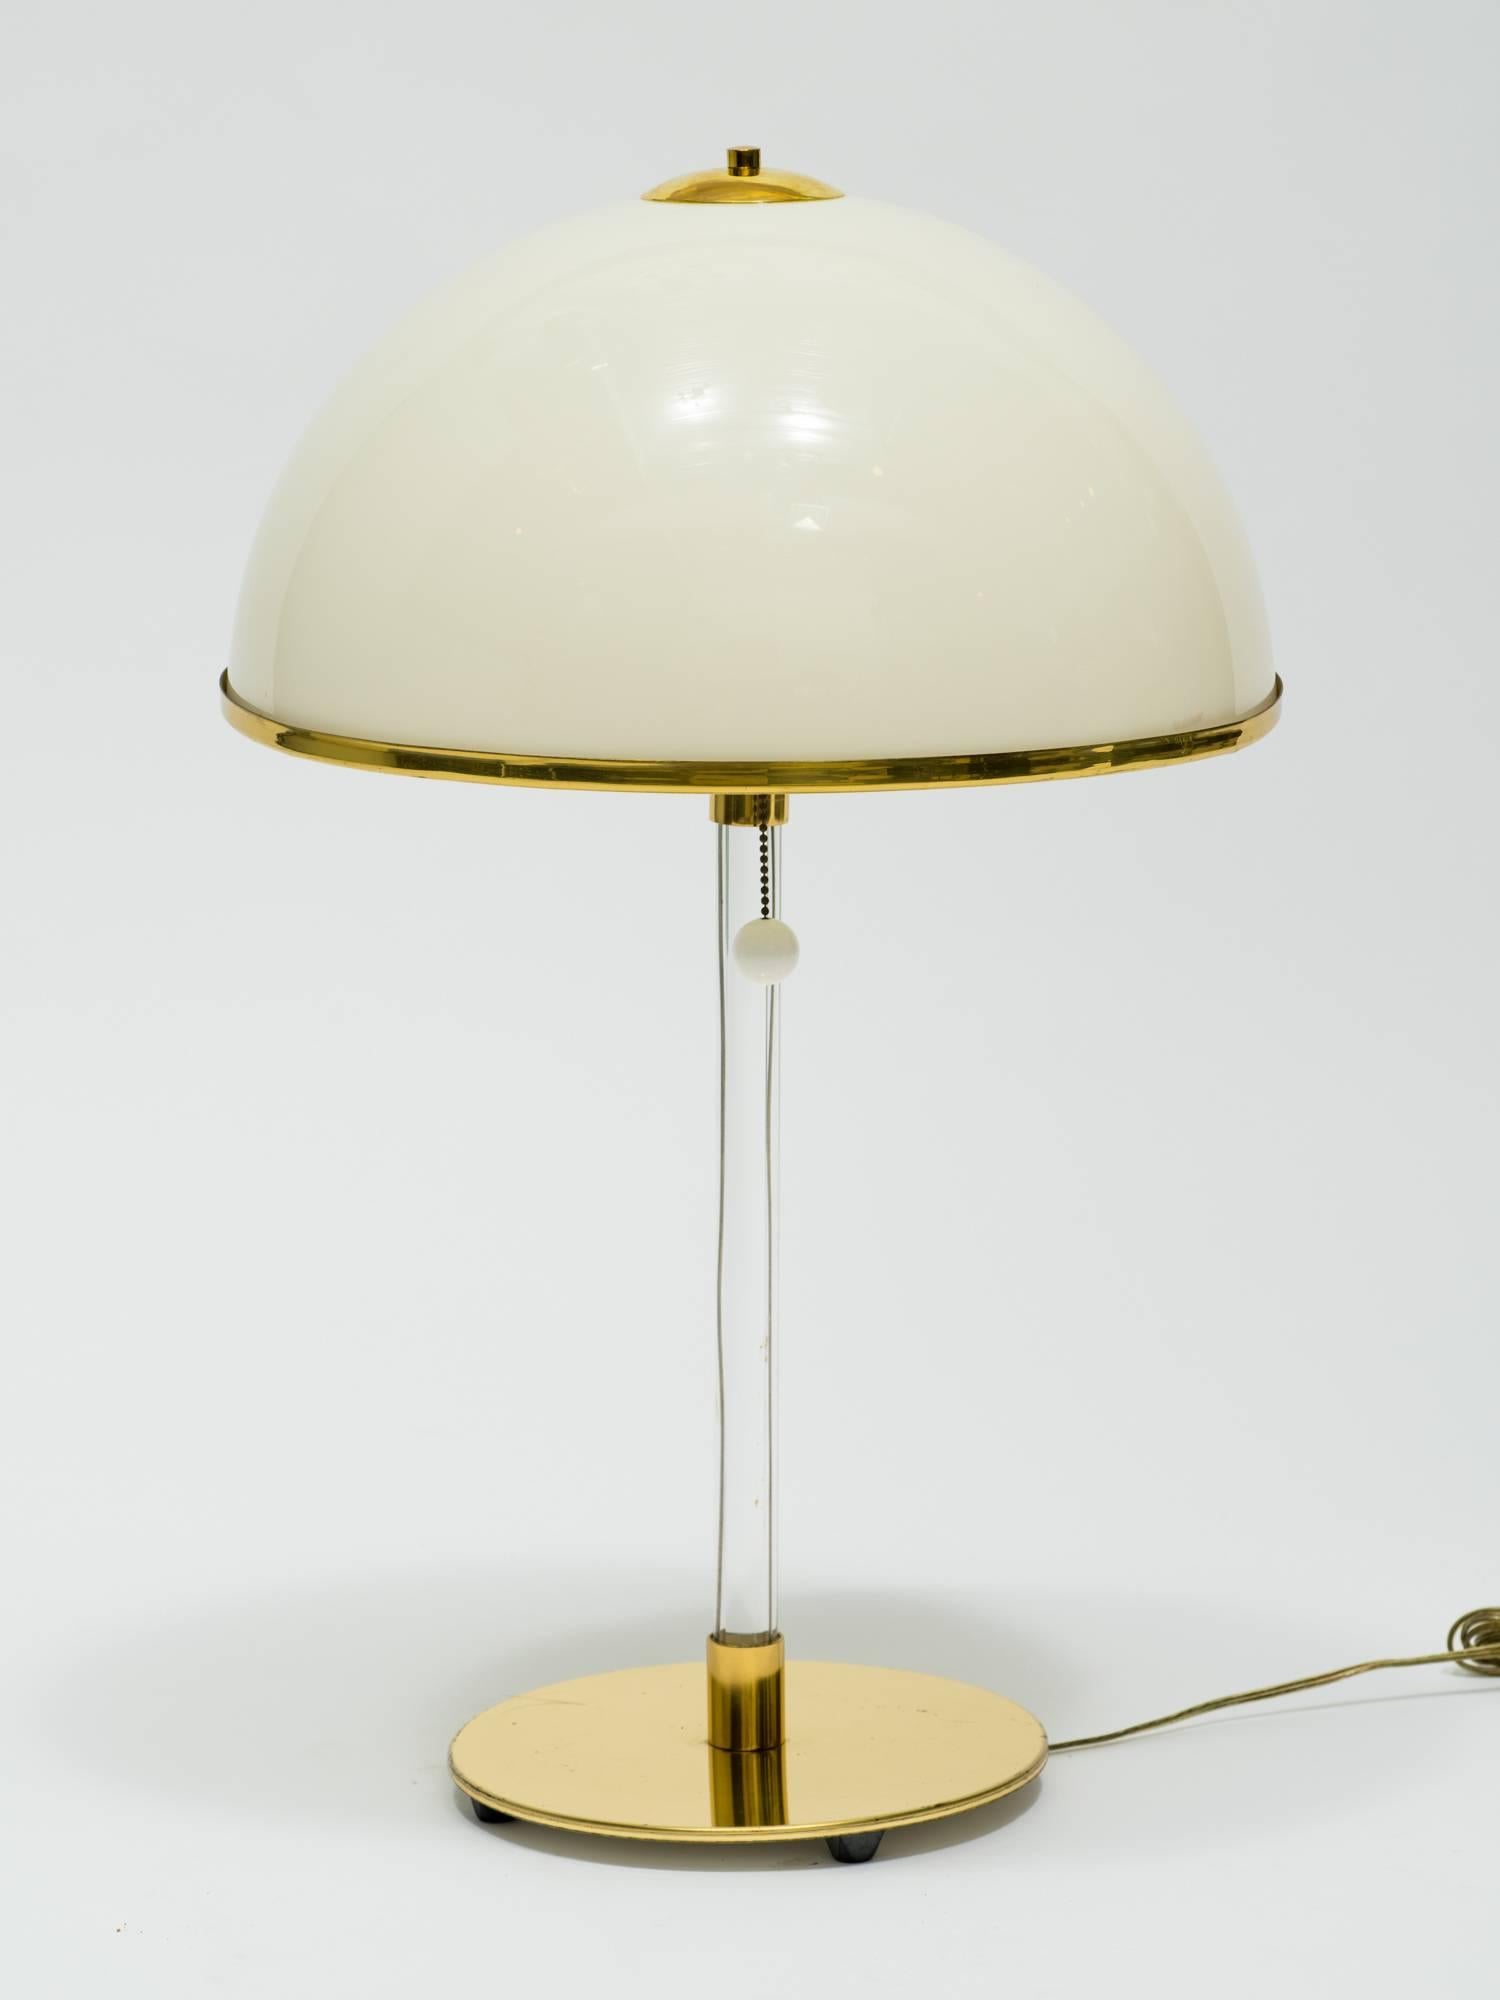 Super chic 1970s Lucite lamps with plastic mushroom shades on a brass base.